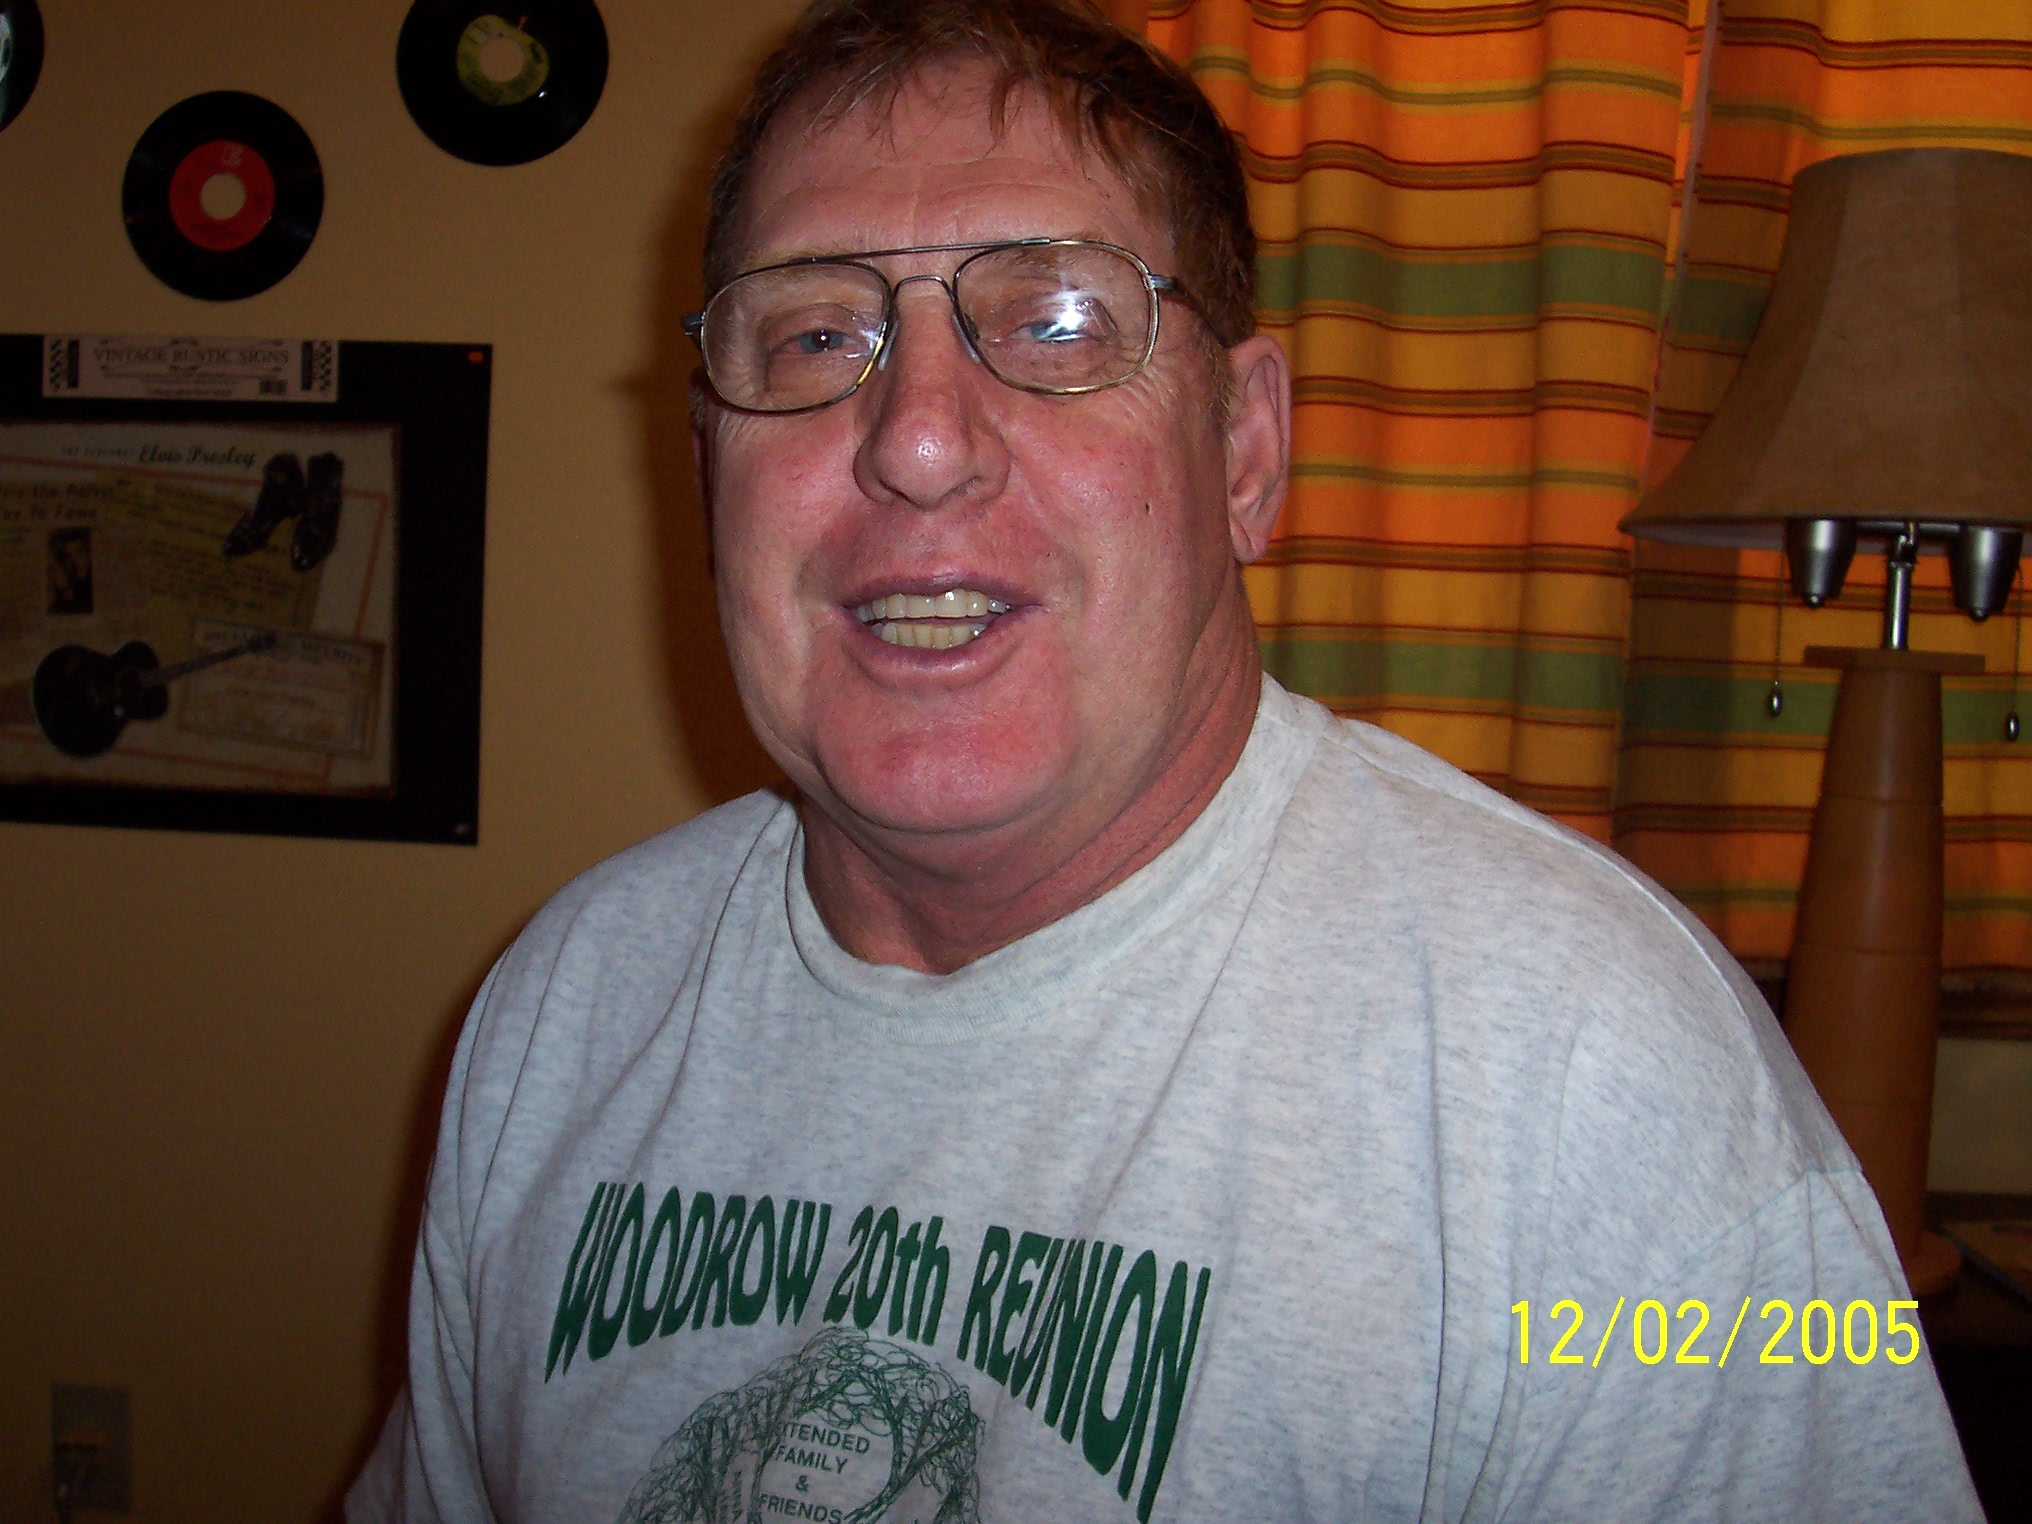 Minnesota Missing Person Notices-Minnesota Missing Person Notice Website-Leroy Keith Boyd